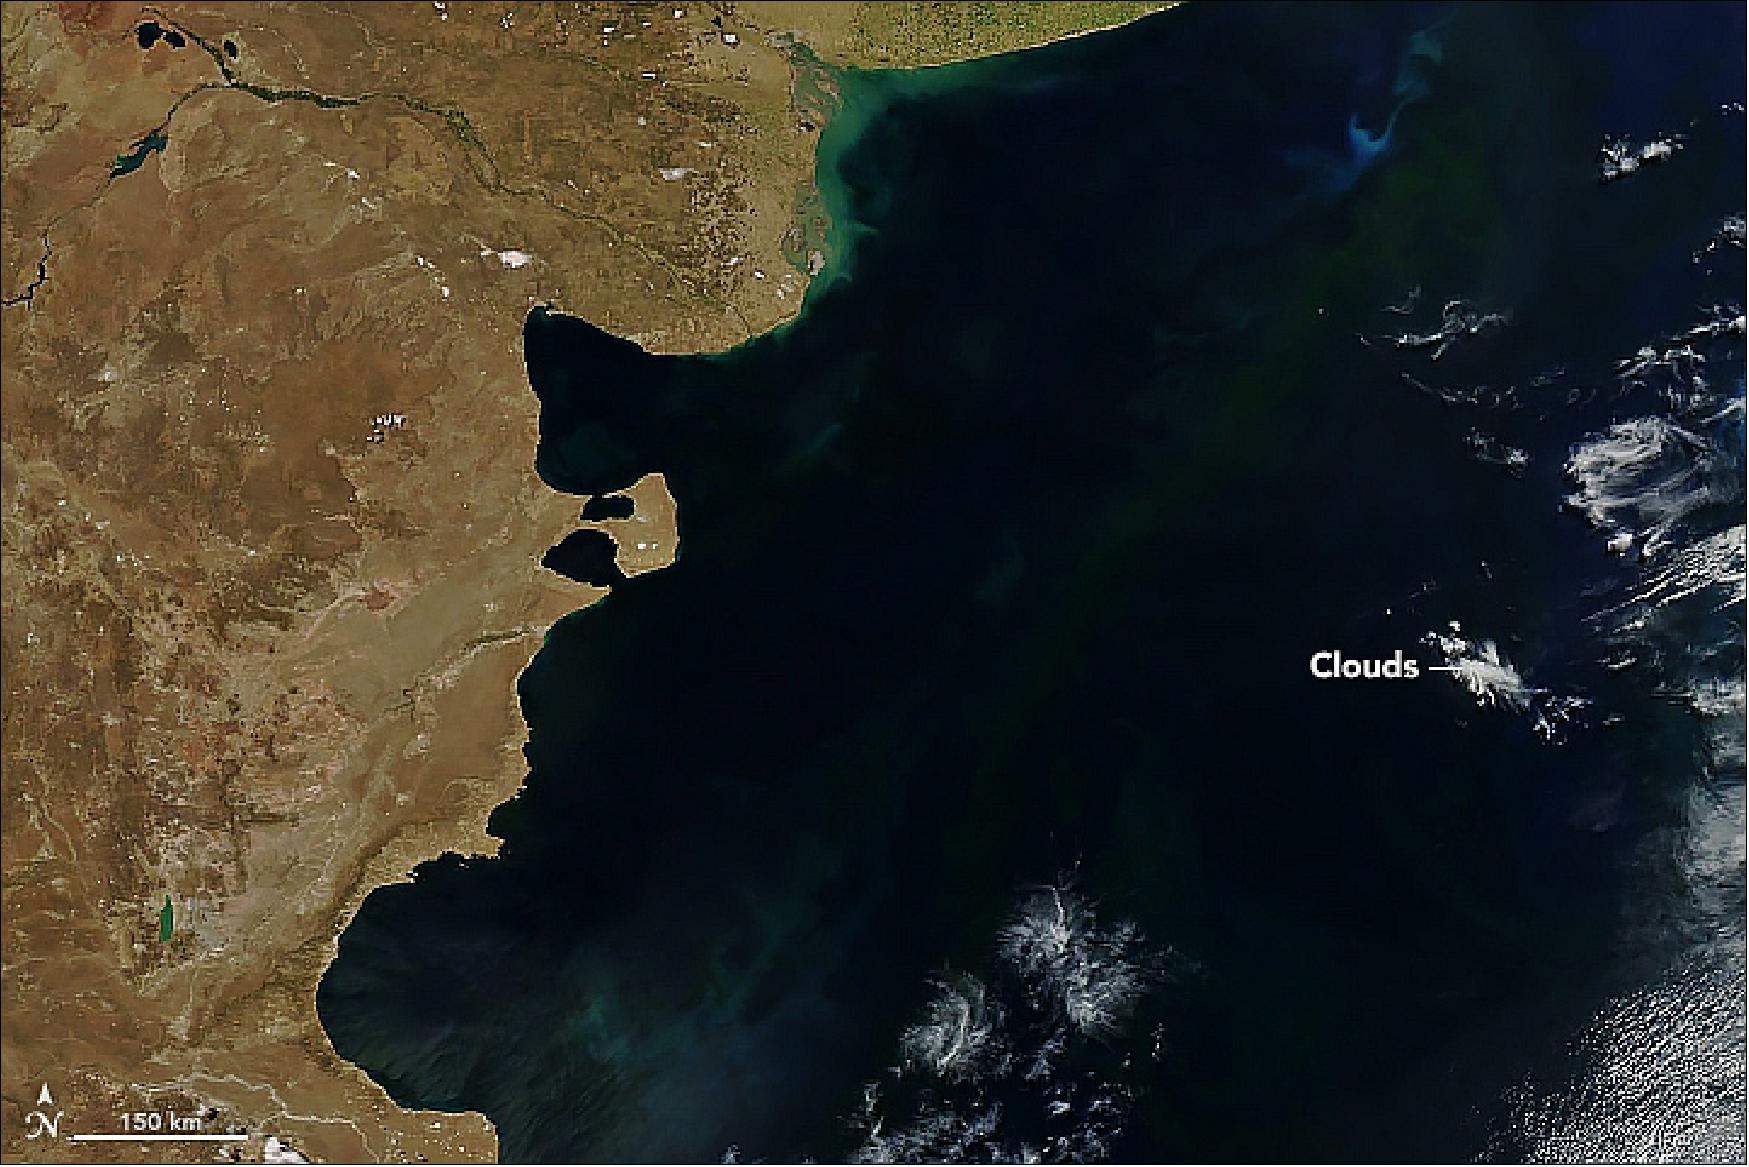 Figure 33: The MODIS image of NASA's Aqua satellite acquired in this dynamic patch of ocean on 15 February 2019. In this natural-color image, we see very faint traces of green and milky blue amidst the inky blue-black of the deep ocean.